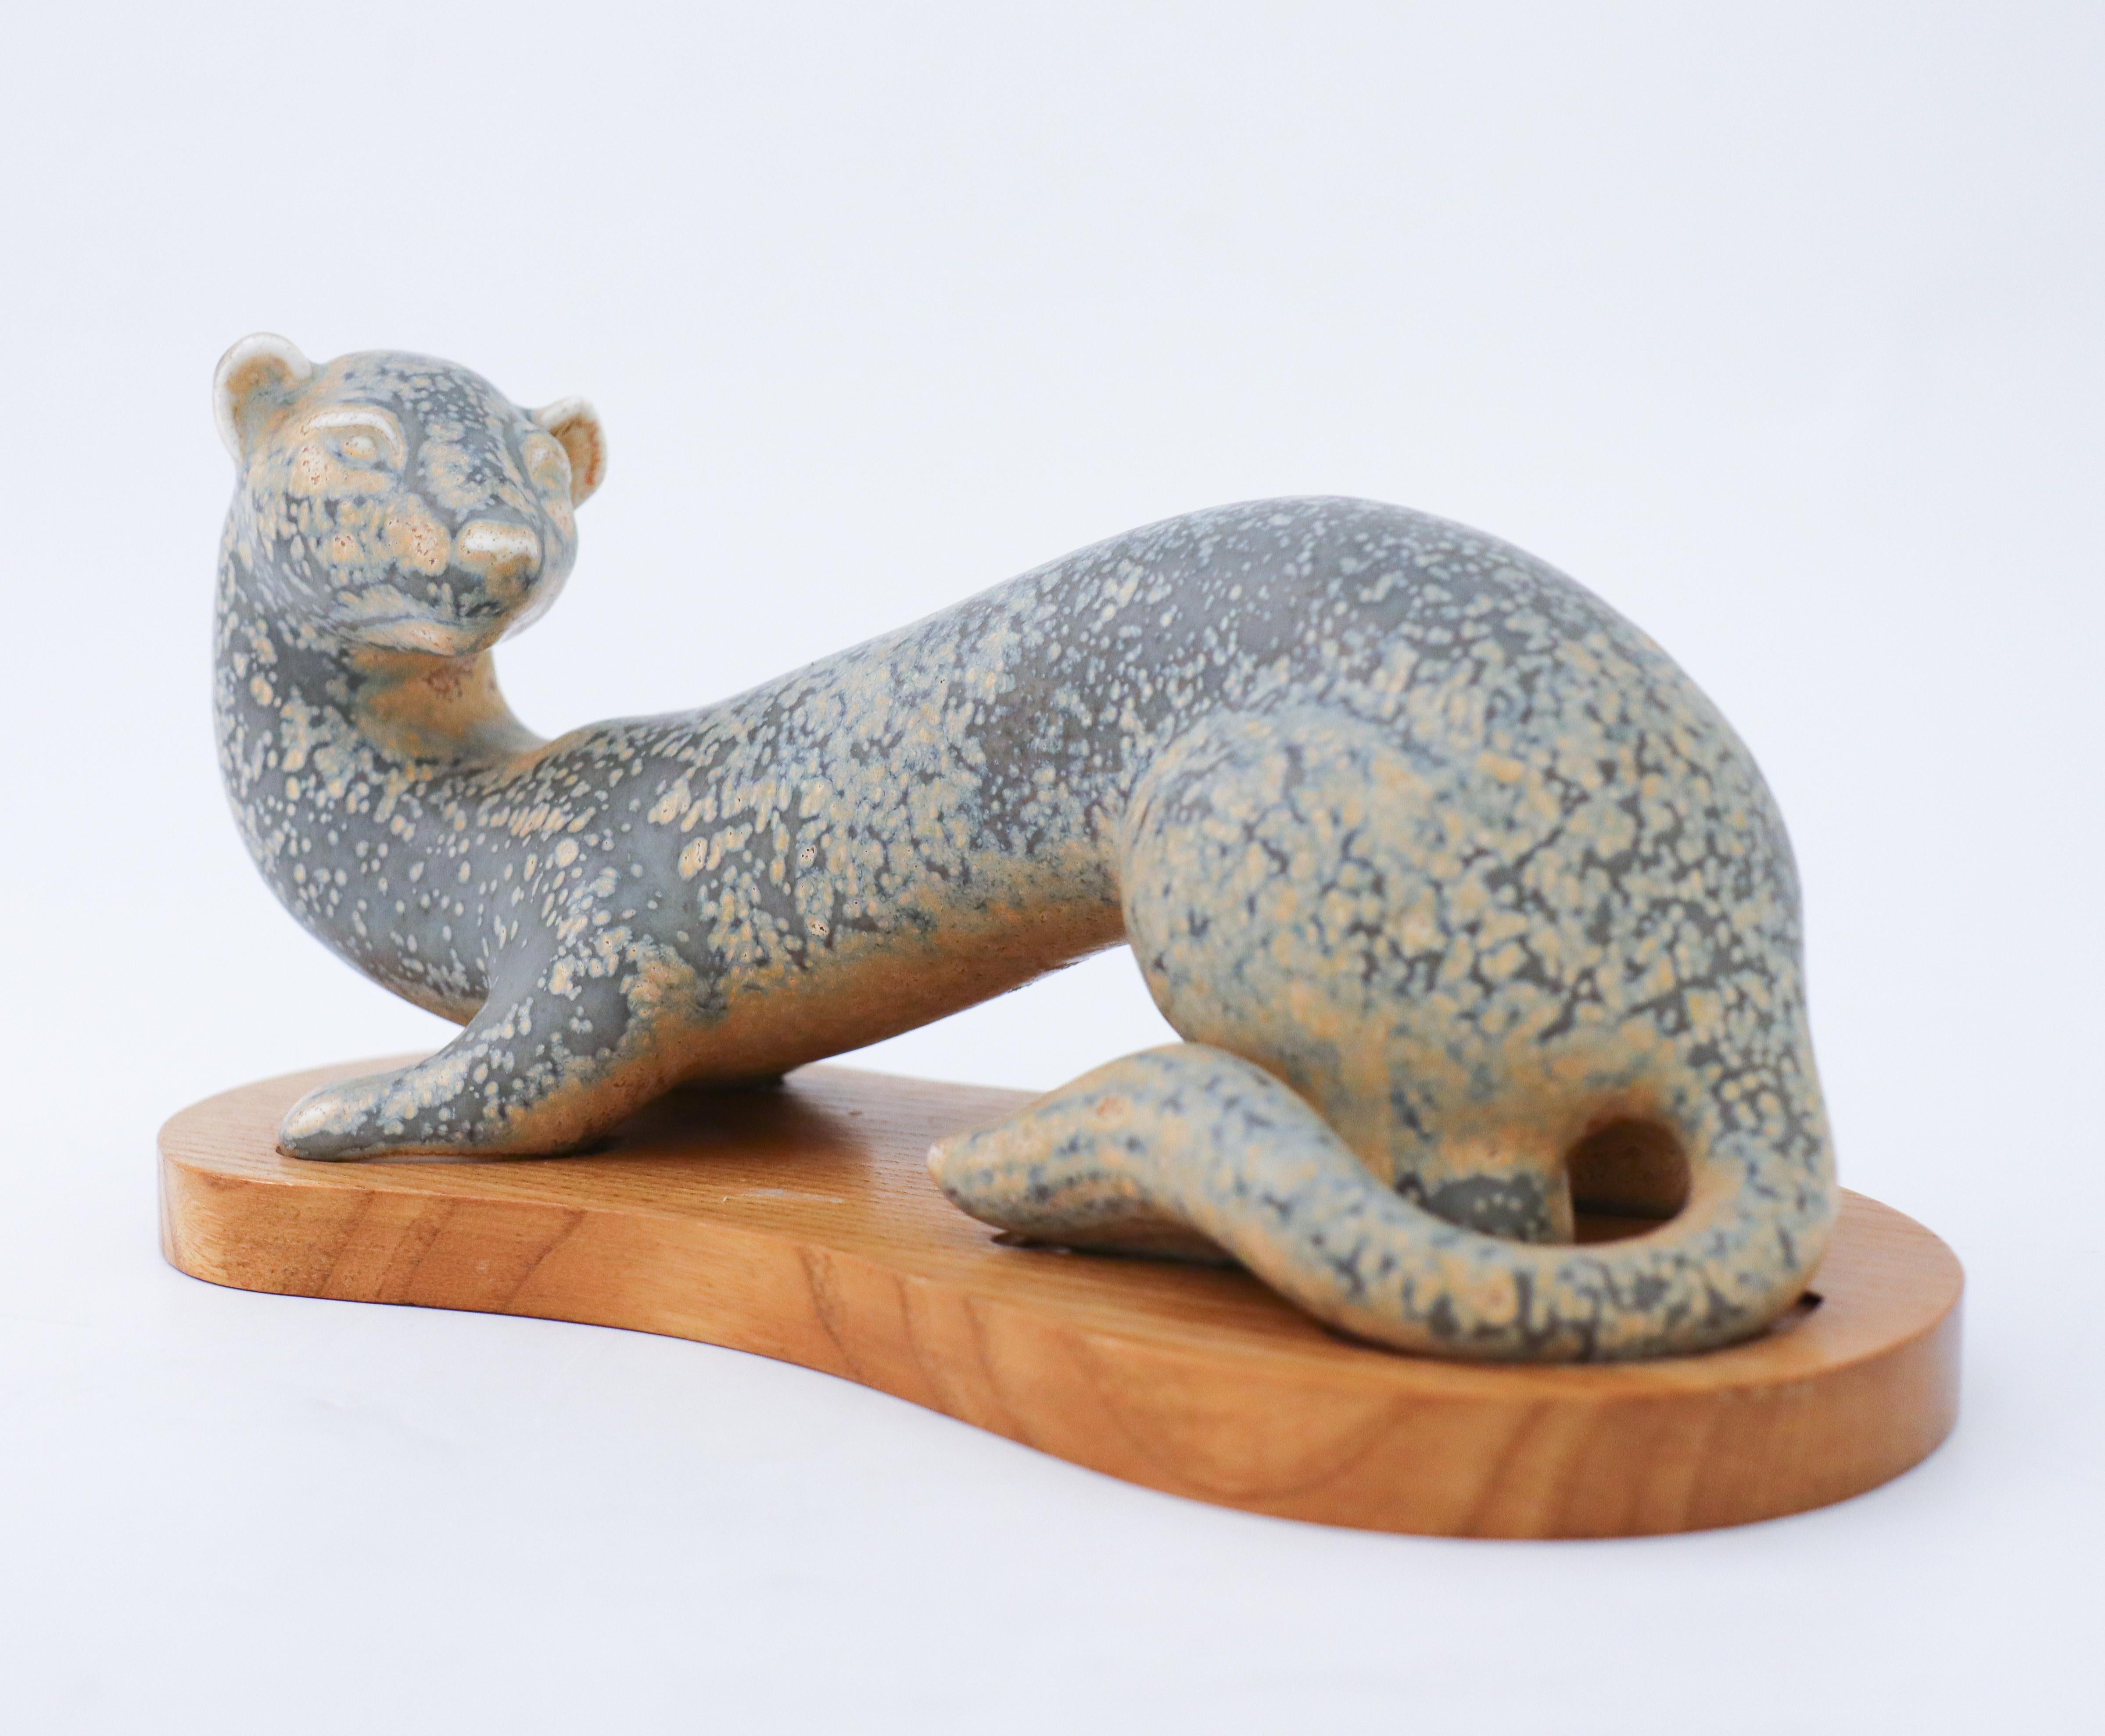 A figurine of a Ferret designed by Gunnar Nylund at Rörstrand, it is 12 cm high and in very good condition with a lovely glaze. It is marked as 1st quality.